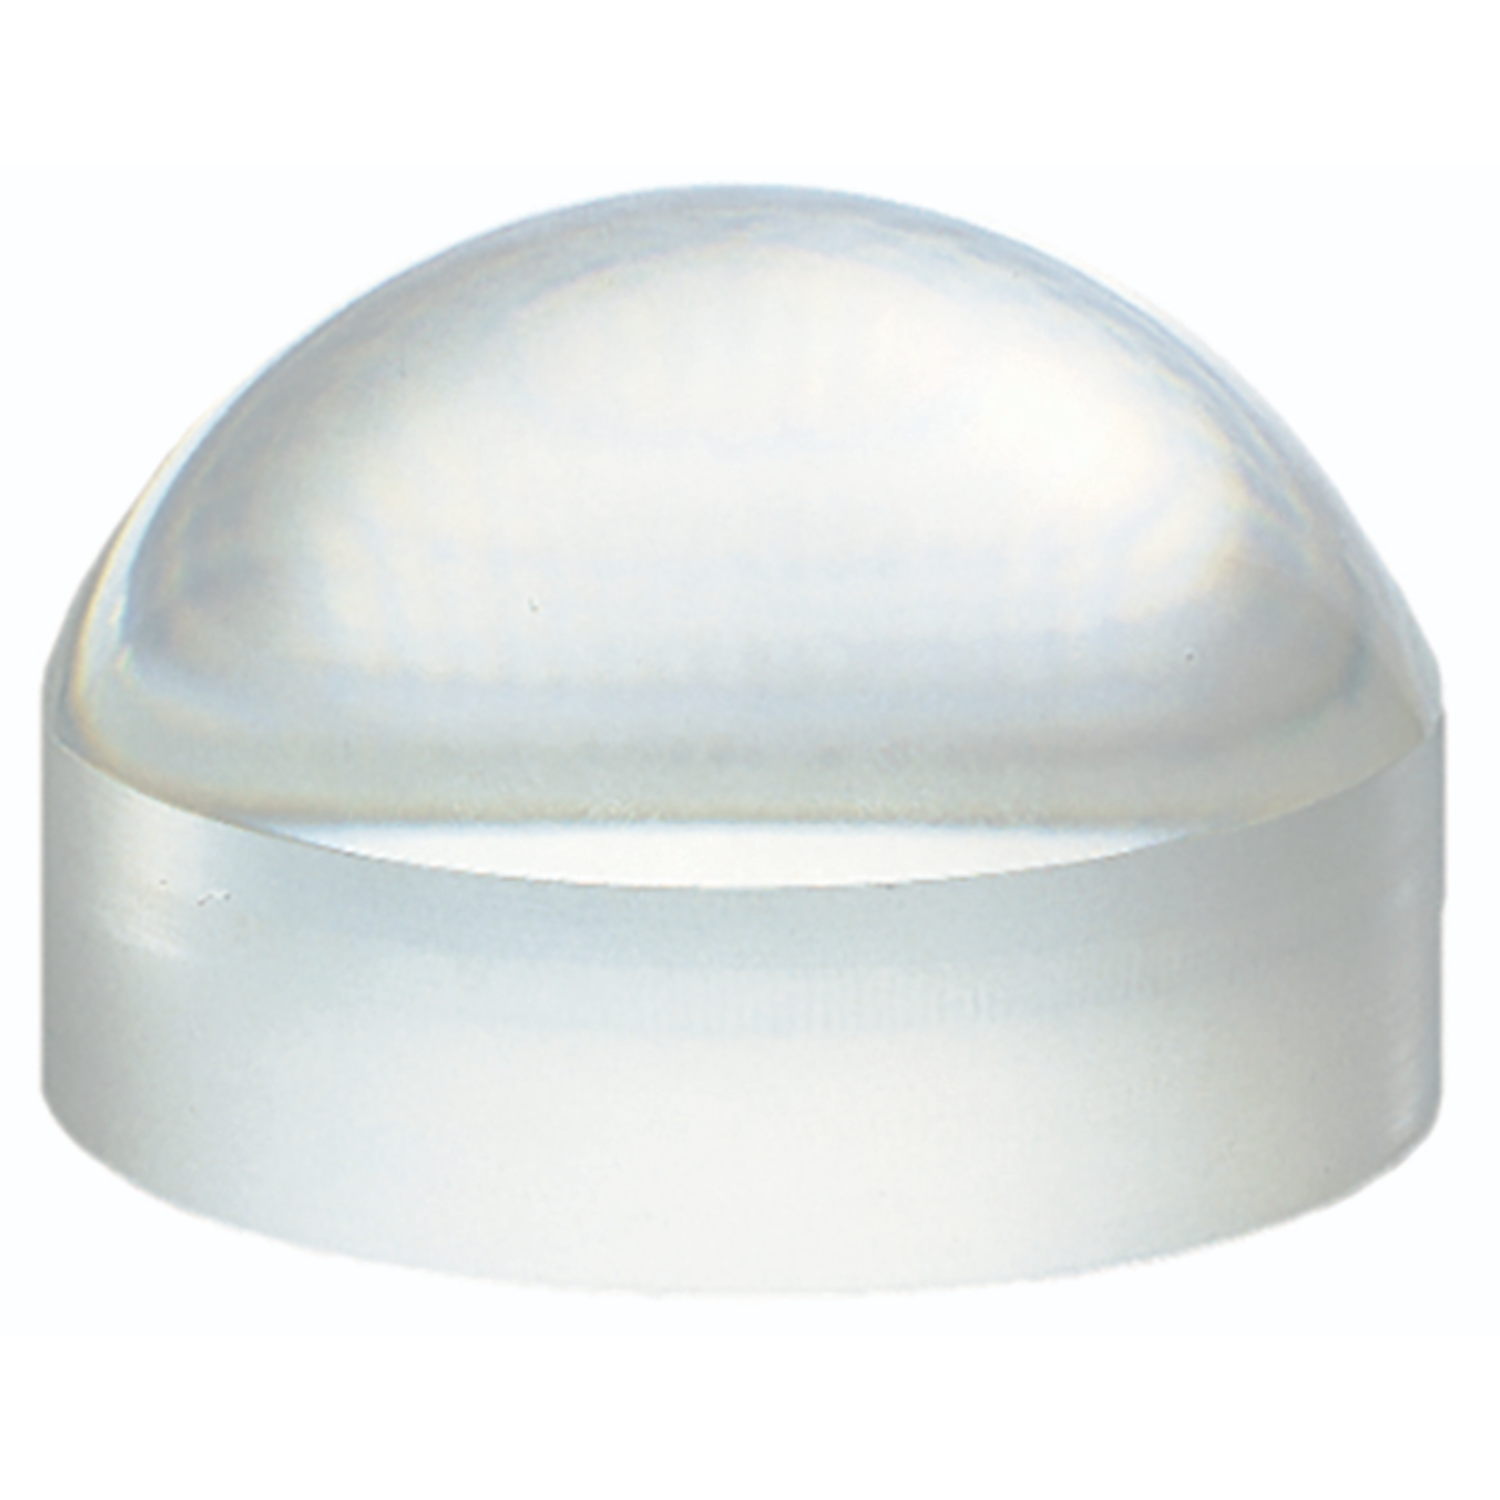 Image of 1.8x bright field dome magnifier from Eschenbach Optik